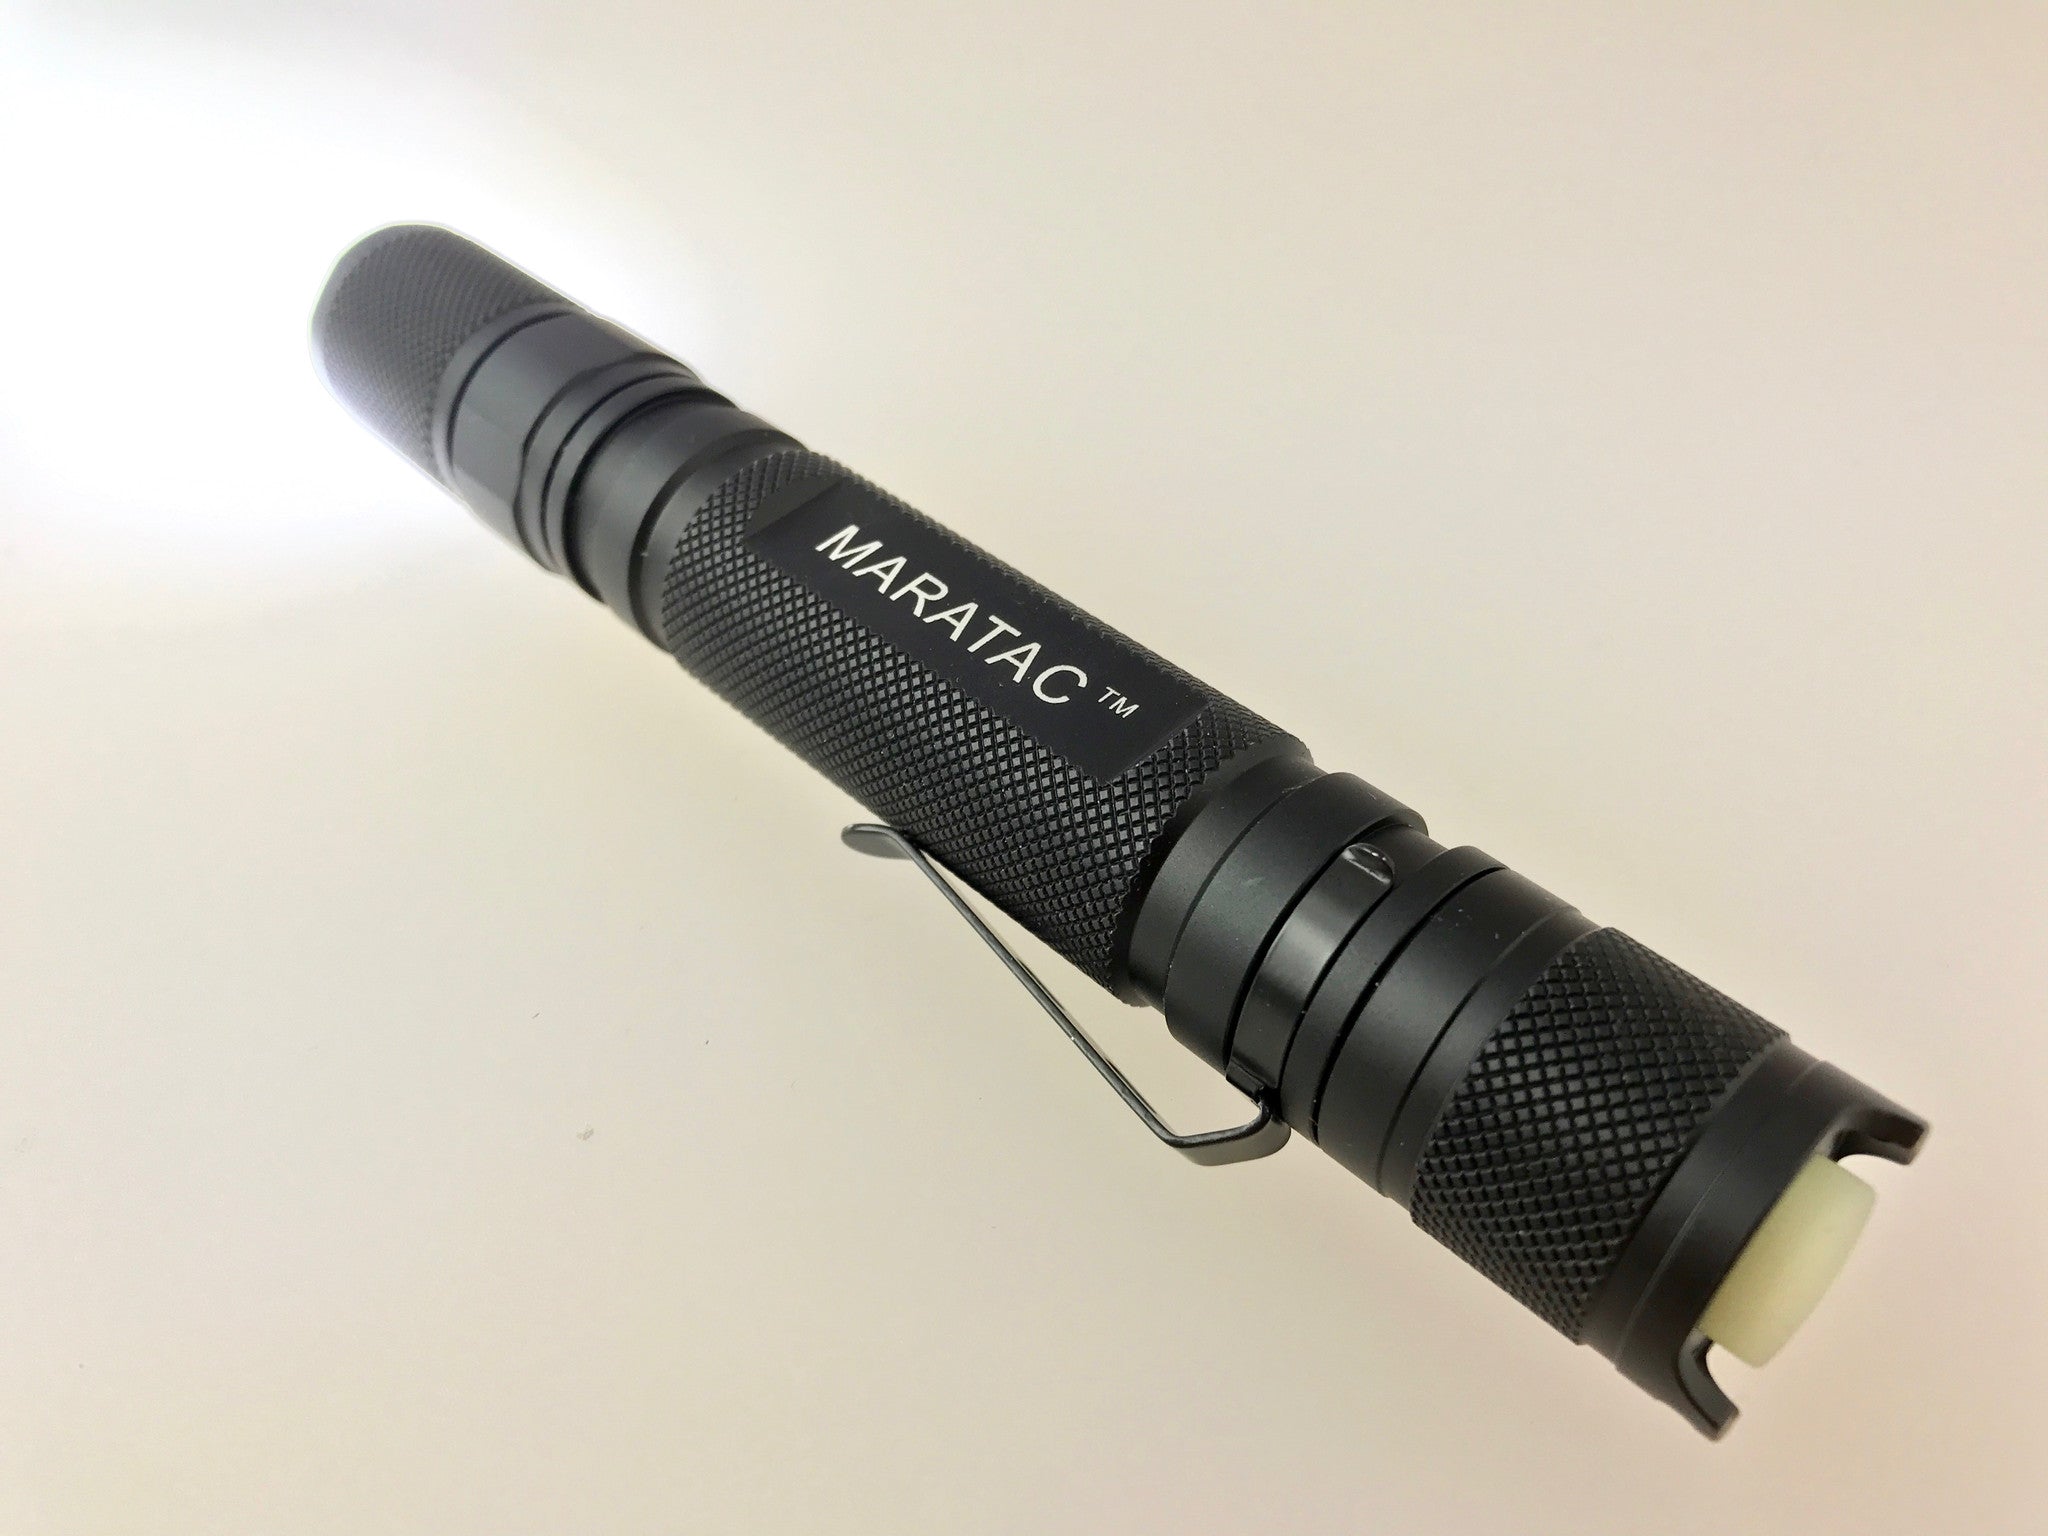 AAx2 Extreme - Glow - Tactical Light by Maratac REV 5 - CountyComm